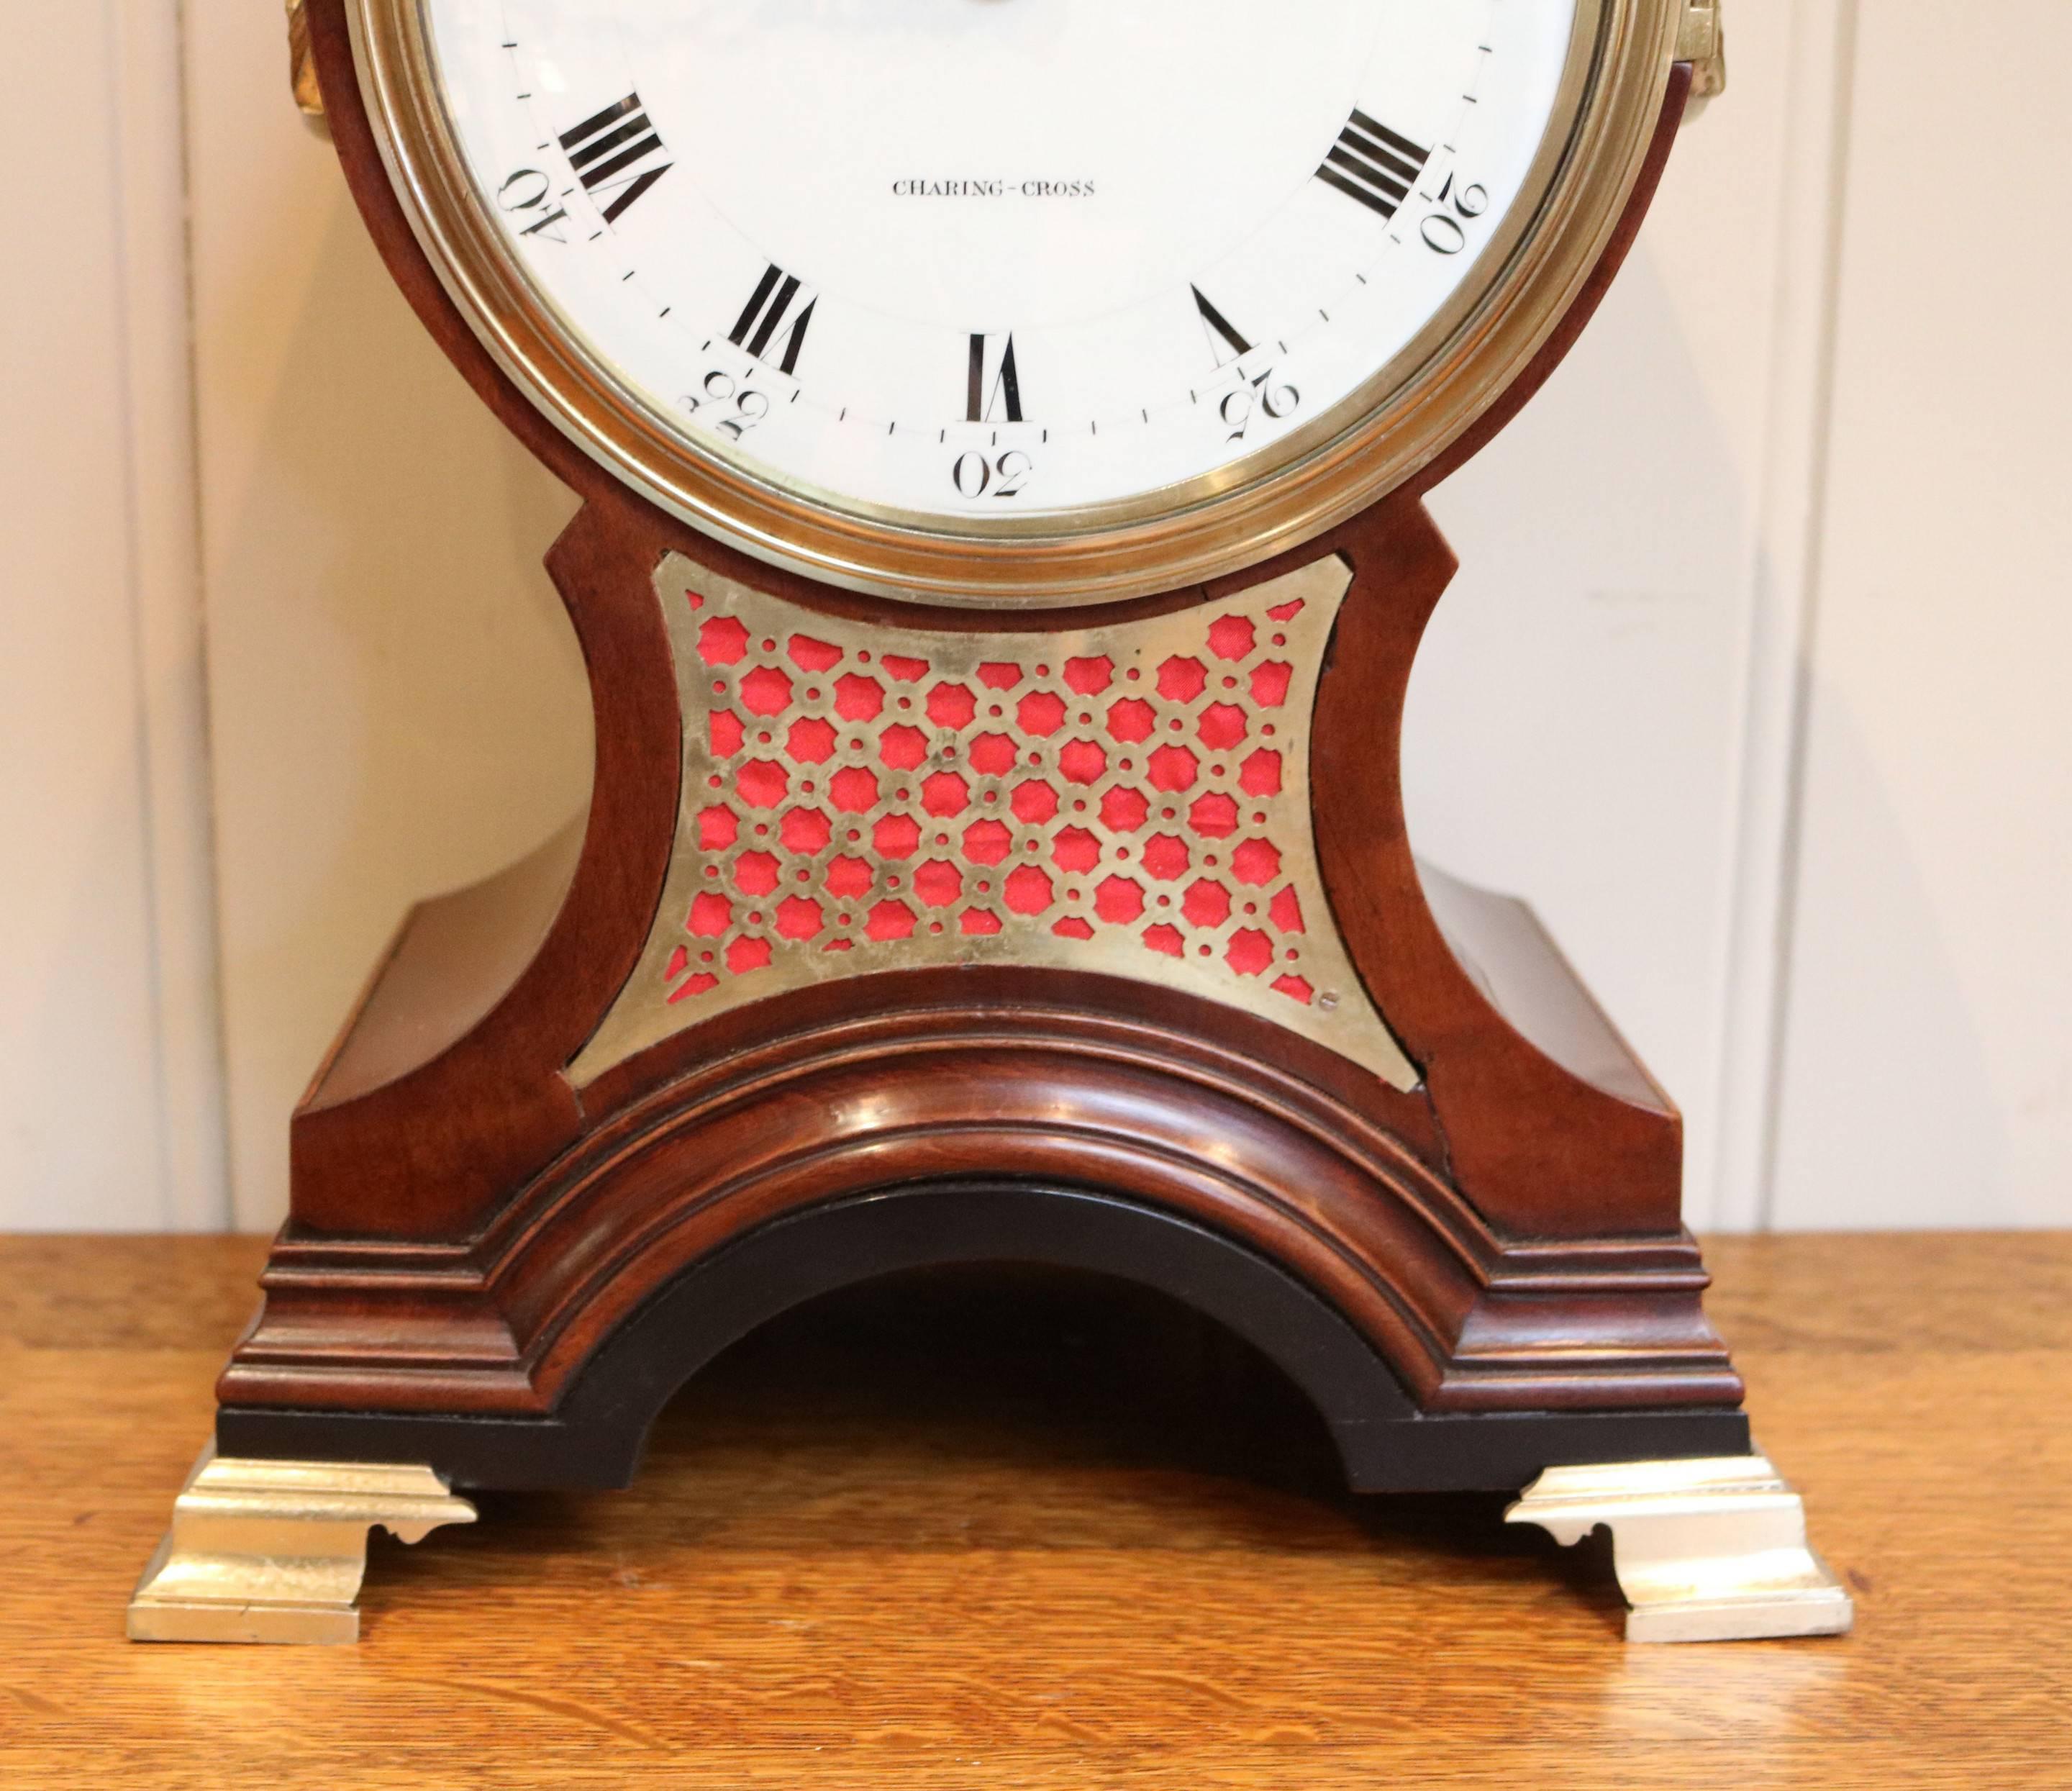 An impressive English balloon clock dating circa 1790. The mahogany case has a brass pineapple finial, brass carrying handles and a pierced brass front grill standing on substantial ogee bracket feet. The stepped brass bezel has a convex glass. It